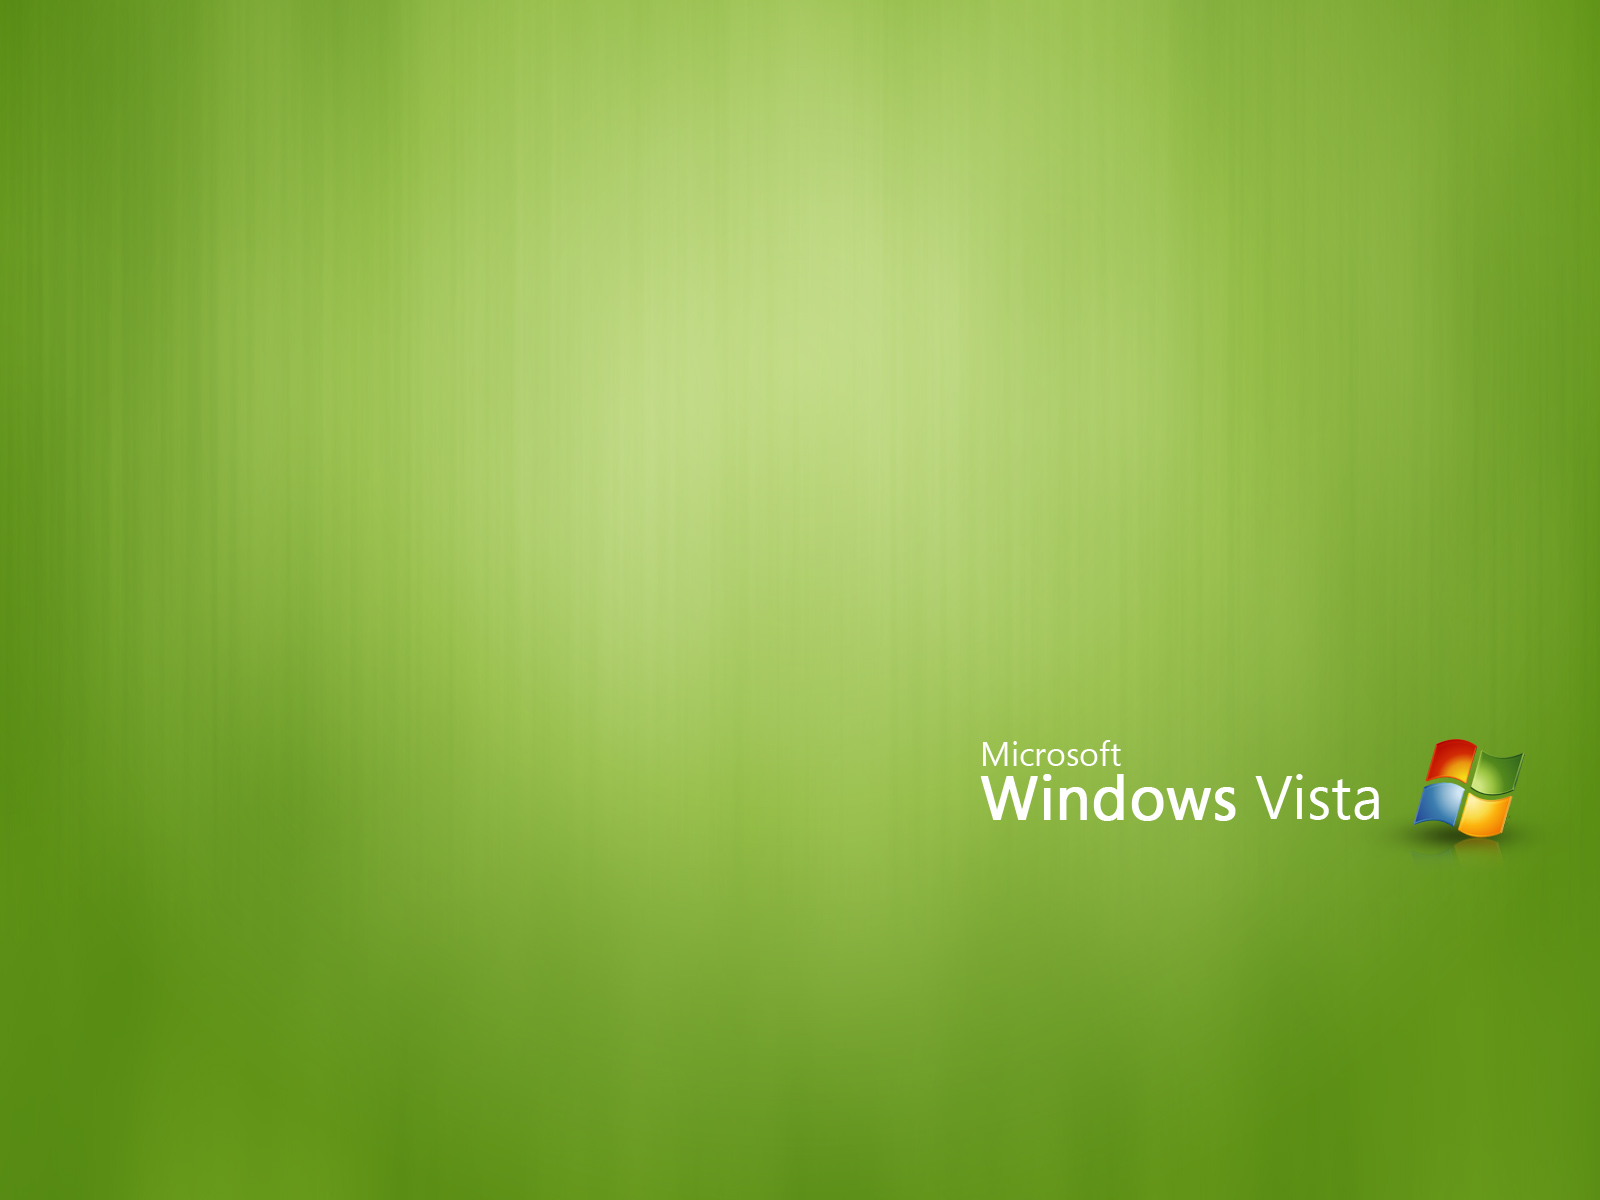 Windows Vista HD Wallpaper. Posted by maxi at 2:07 AM · Email This BlogThis!